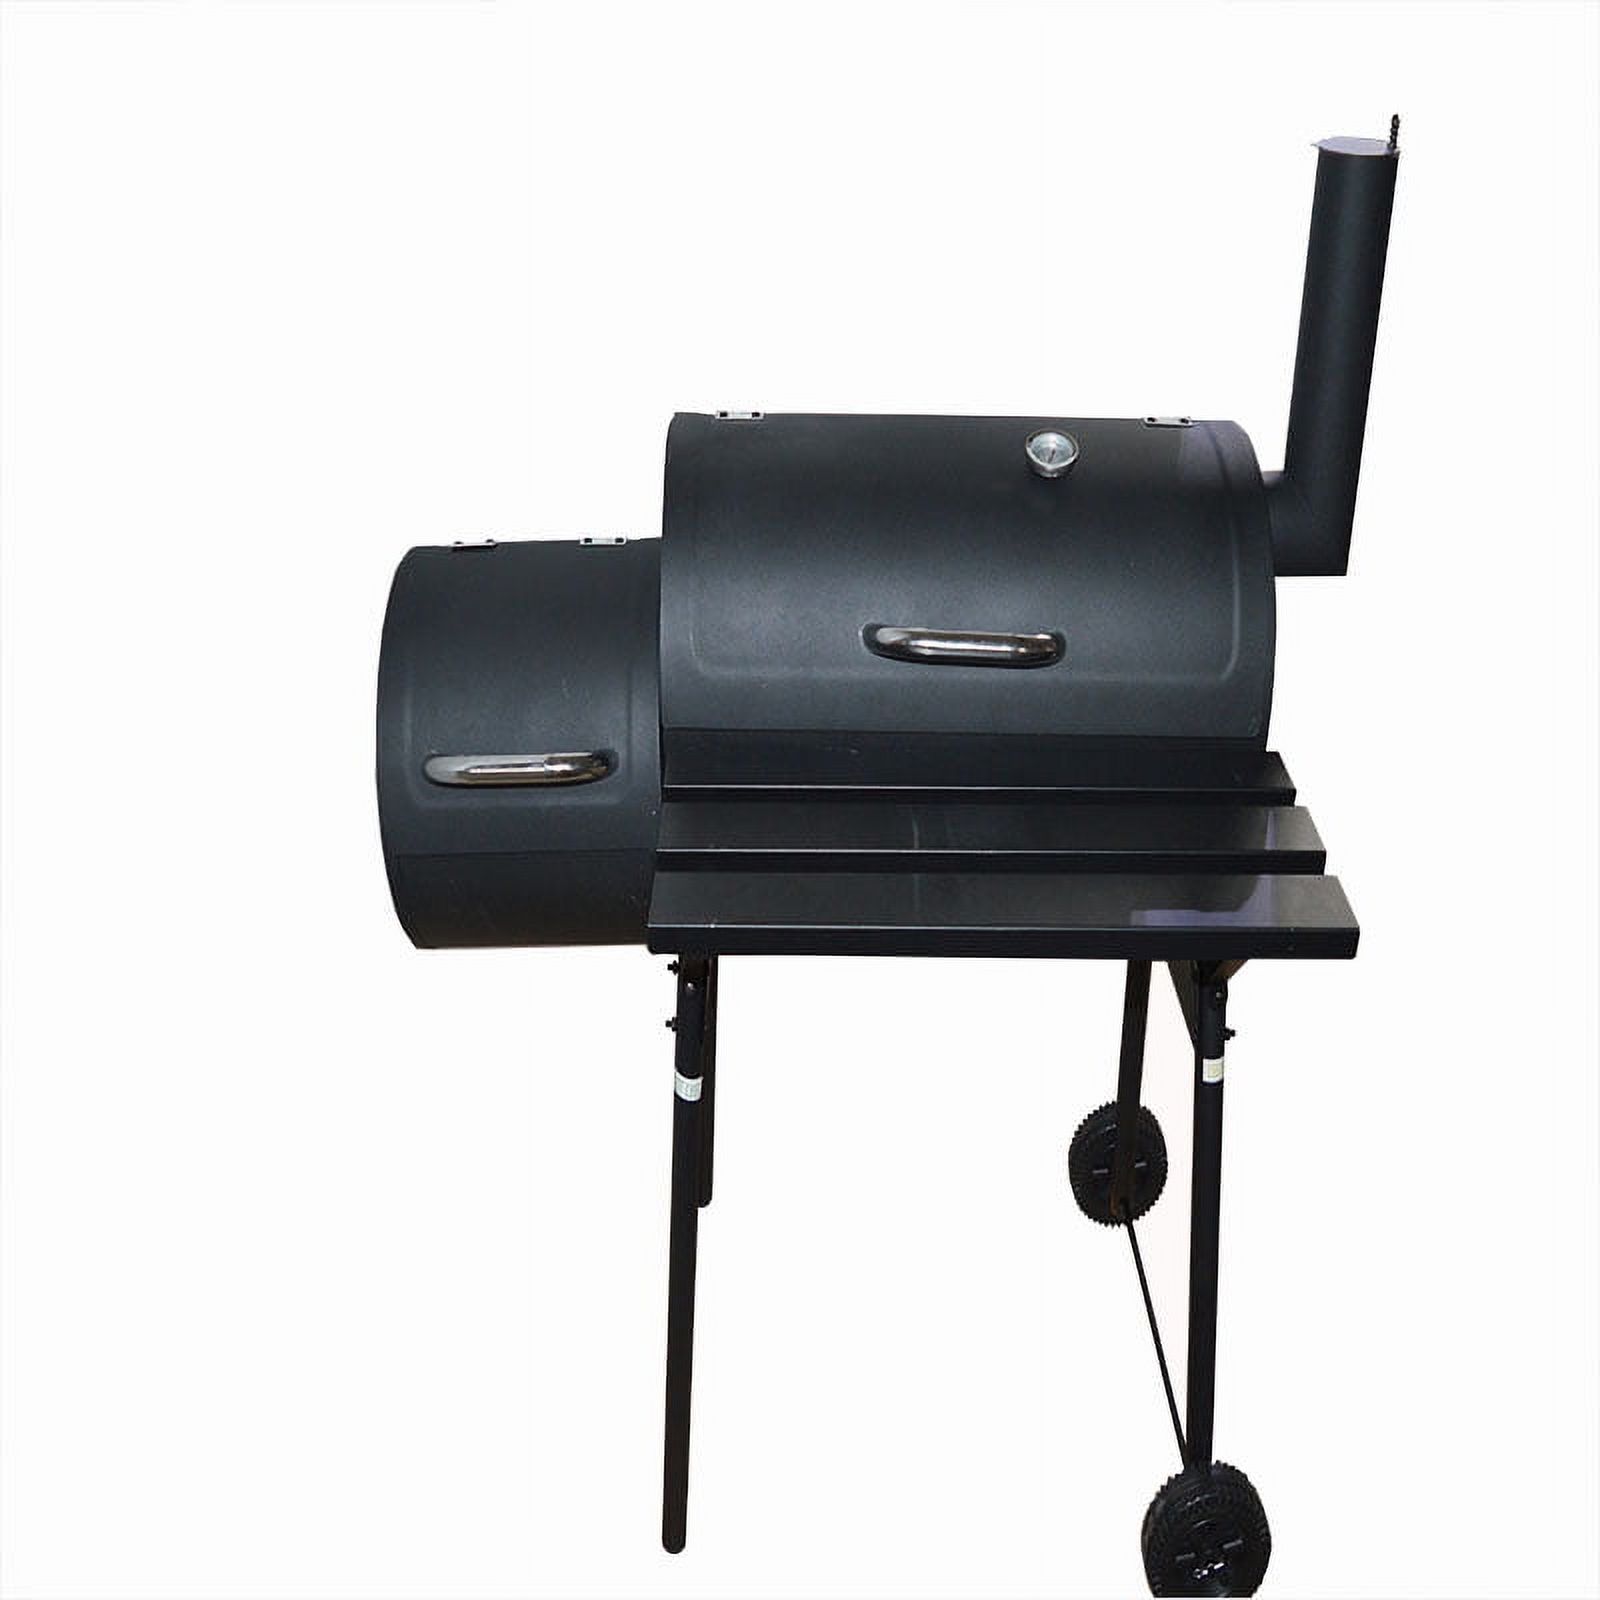 INTBUYING Outdoor BBQ Grill Camping Garden Charcoal Barbecue Stove Grills - image 1 of 8